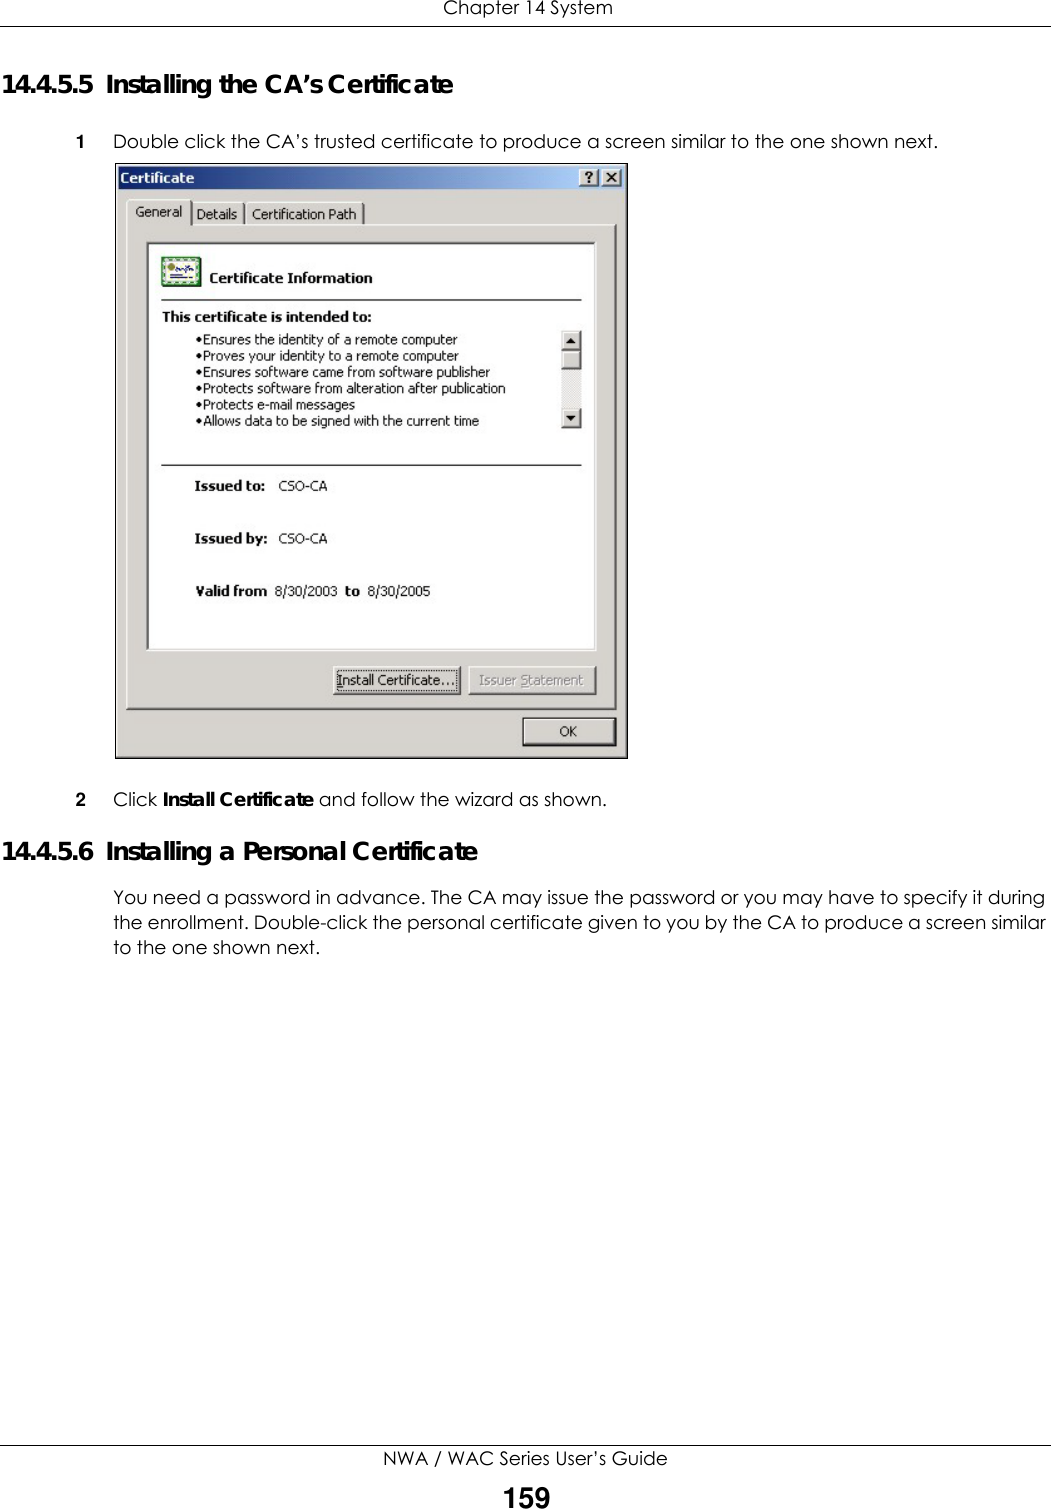  Chapter 14 SystemNWA / WAC Series User’s Guide15914.4.5.5  Installing the CA’s Certificate1Double click the CA’s trusted certificate to produce a screen similar to the one shown next.2Click Install Certificate and follow the wizard as shown.14.4.5.6  Installing a Personal CertificateYou need a password in advance. The CA may issue the password or you may have to specify it during the enrollment. Double-click the personal certificate given to you by the CA to produce a screen similar to the one shown next.